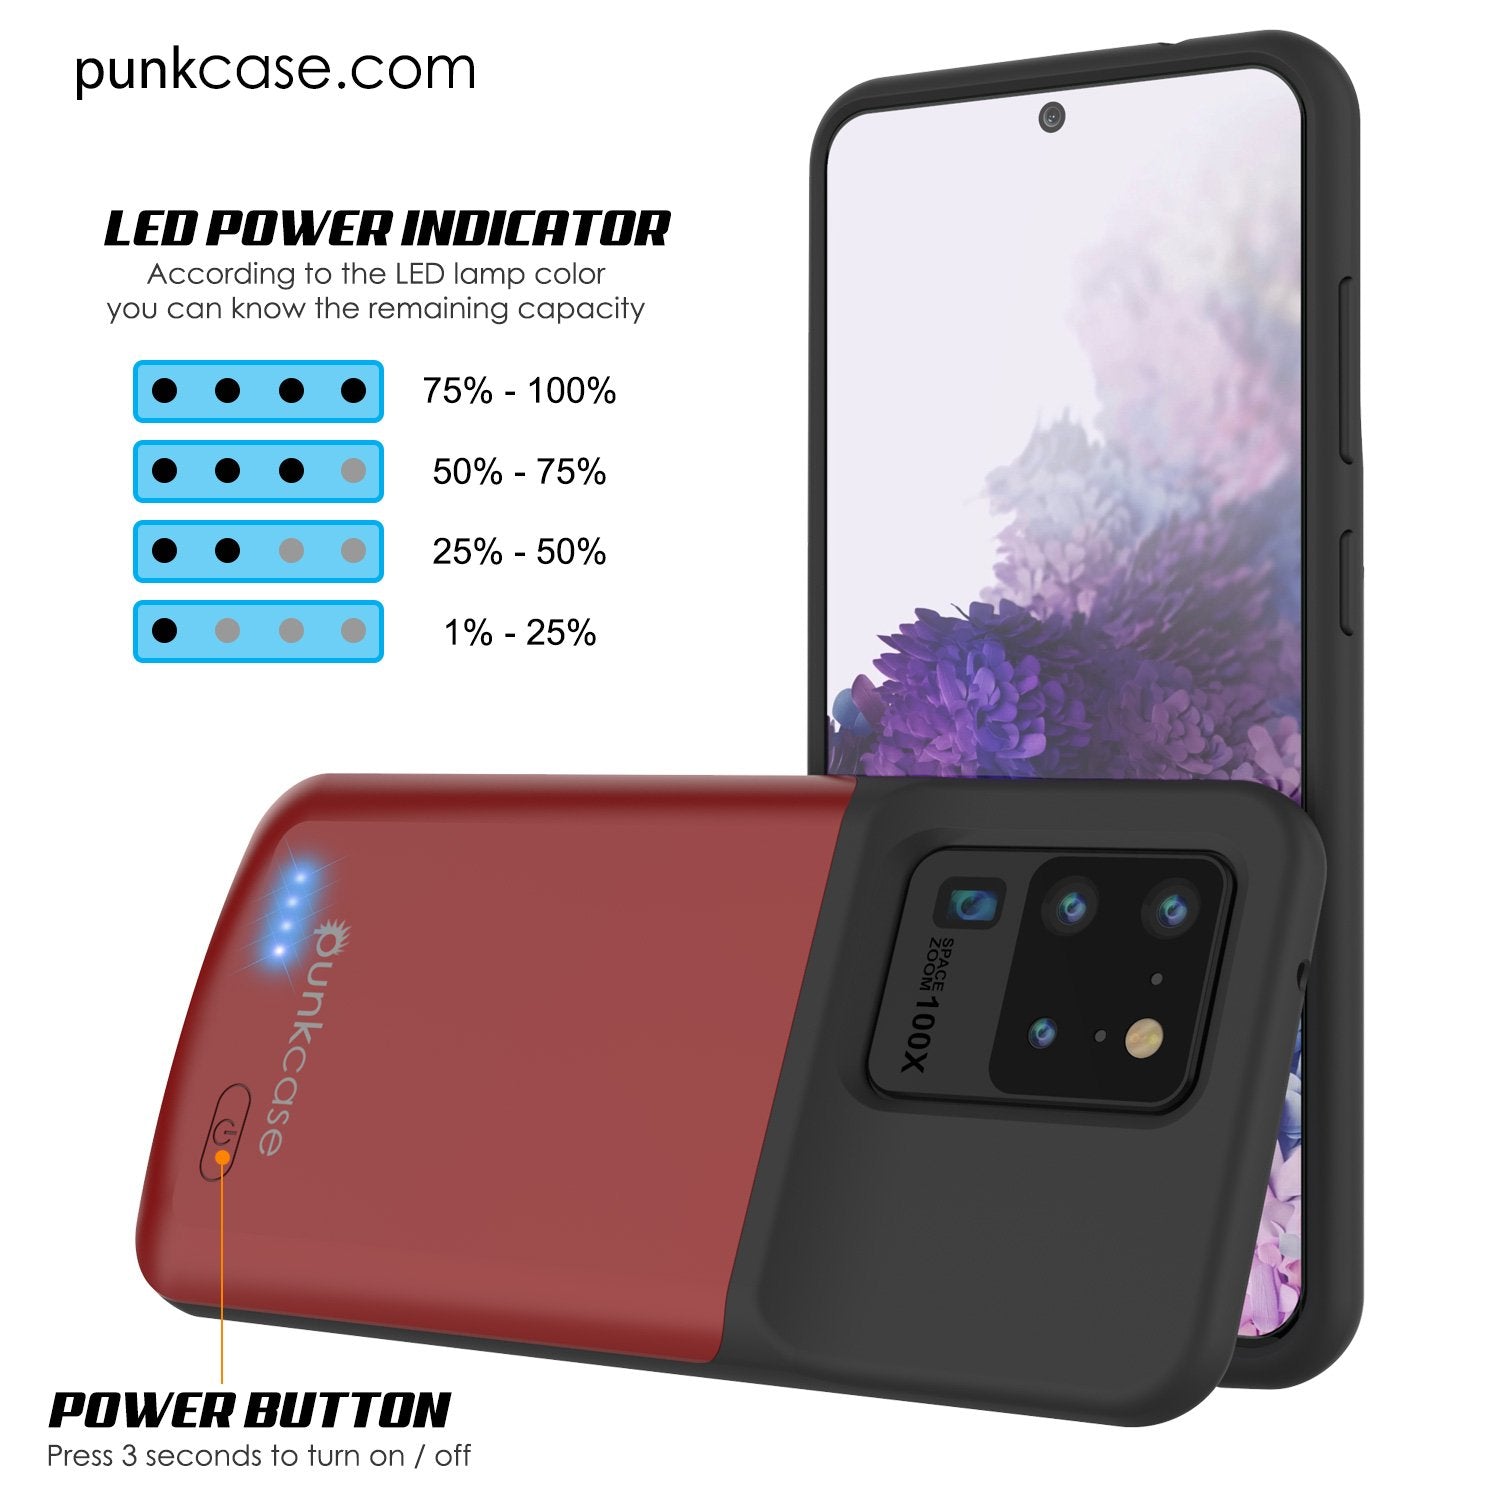 PunkJuice S20 Ultra Battery Case Red - Fast Charging Power Juice Bank with 6000mAh